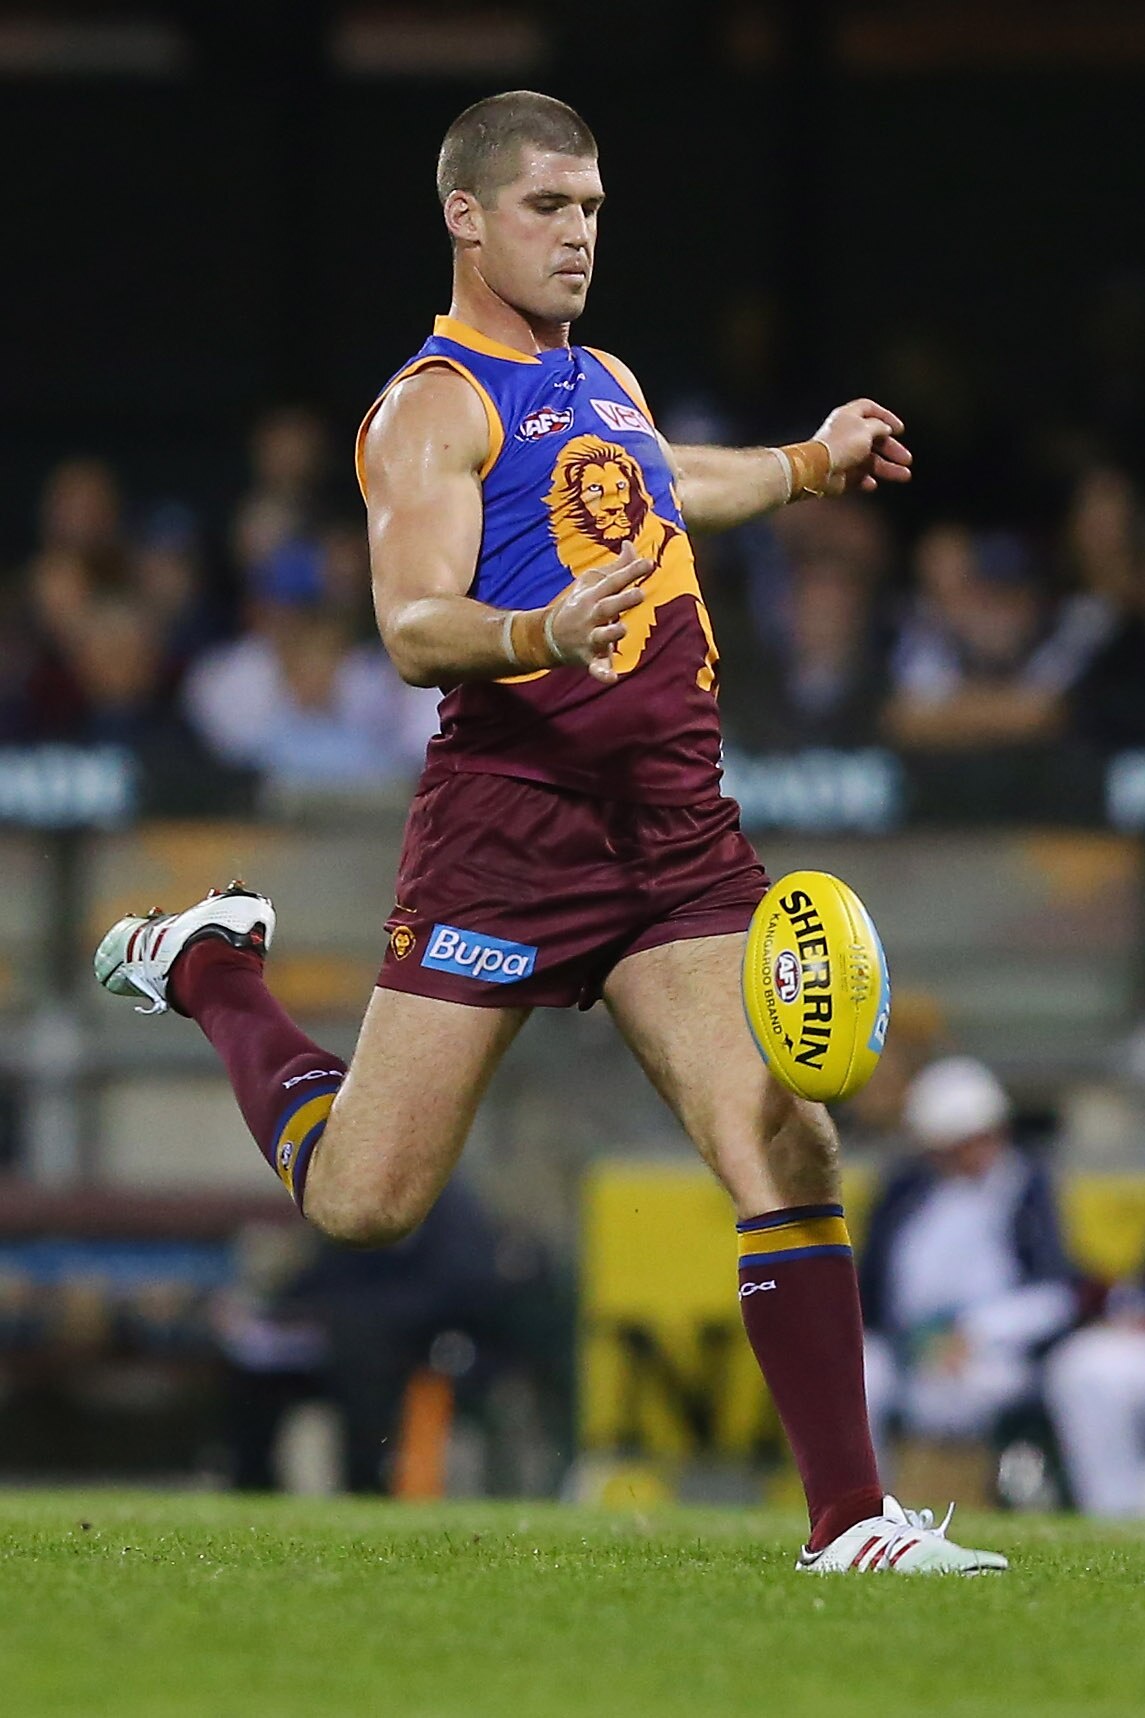 Brisbane Lions AFL forward Jonathan Brown drops the ball for a kick for goal during a game.